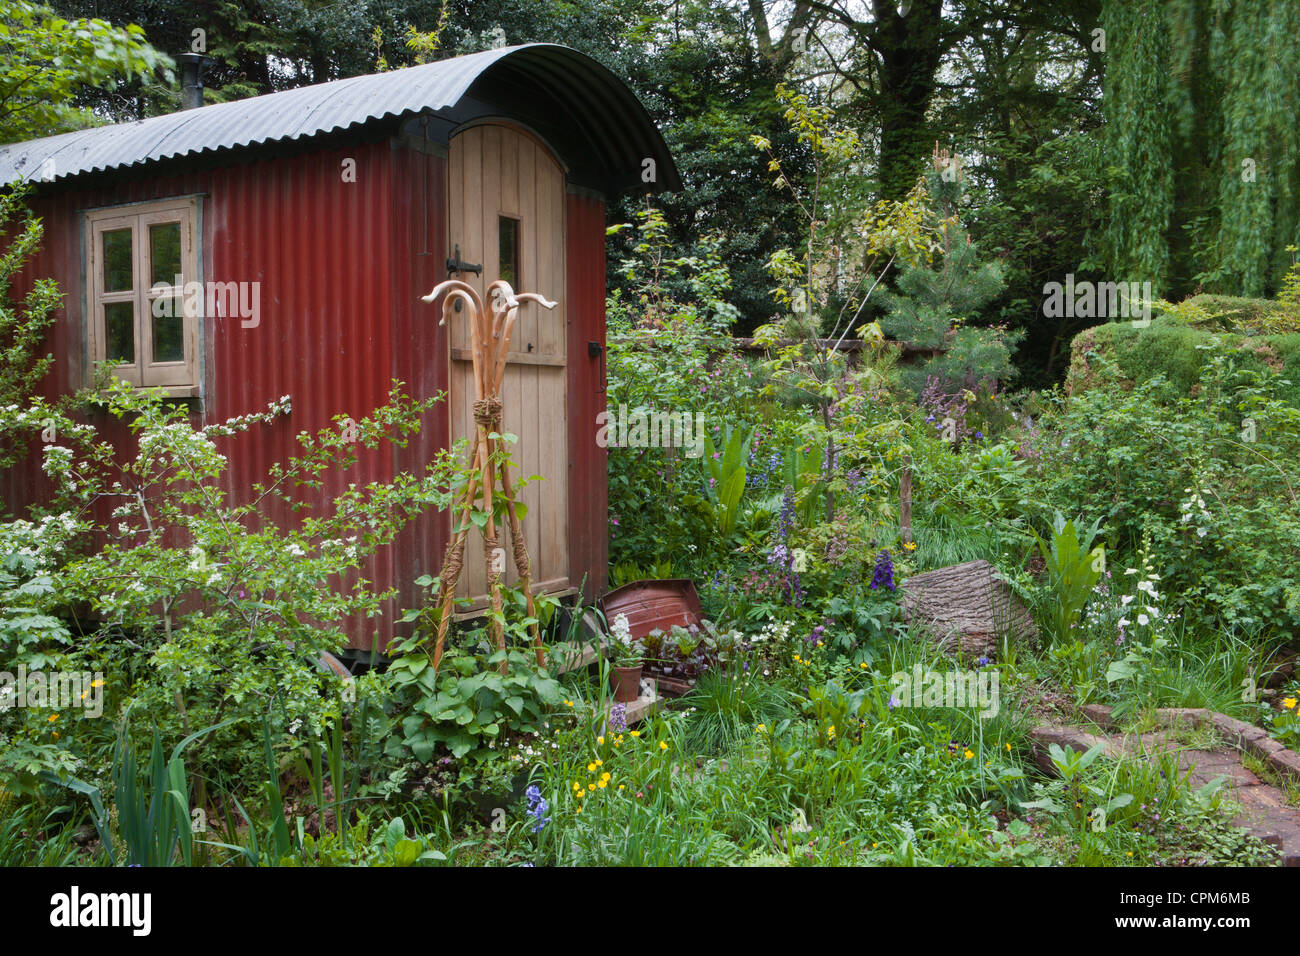 Shepherds hut in a wildflower garden for staycation glamping in the UK Stock Photo